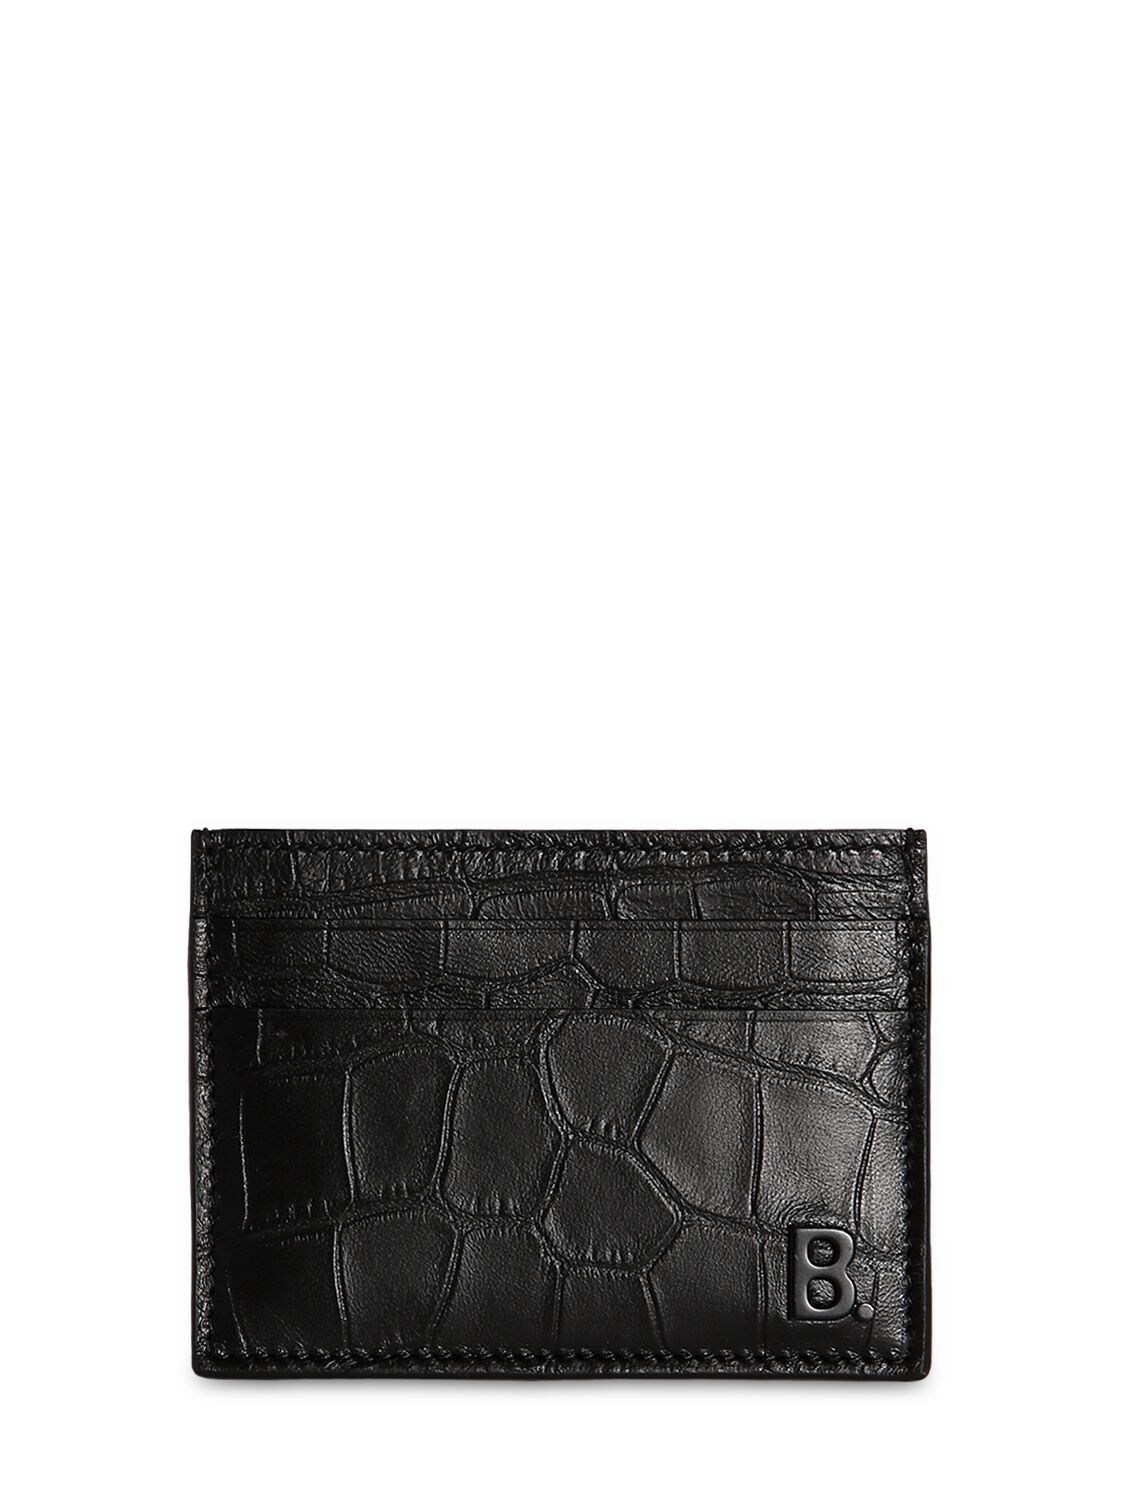 Balenciaga Croc Embossed Leather Credit Card Holder In Black